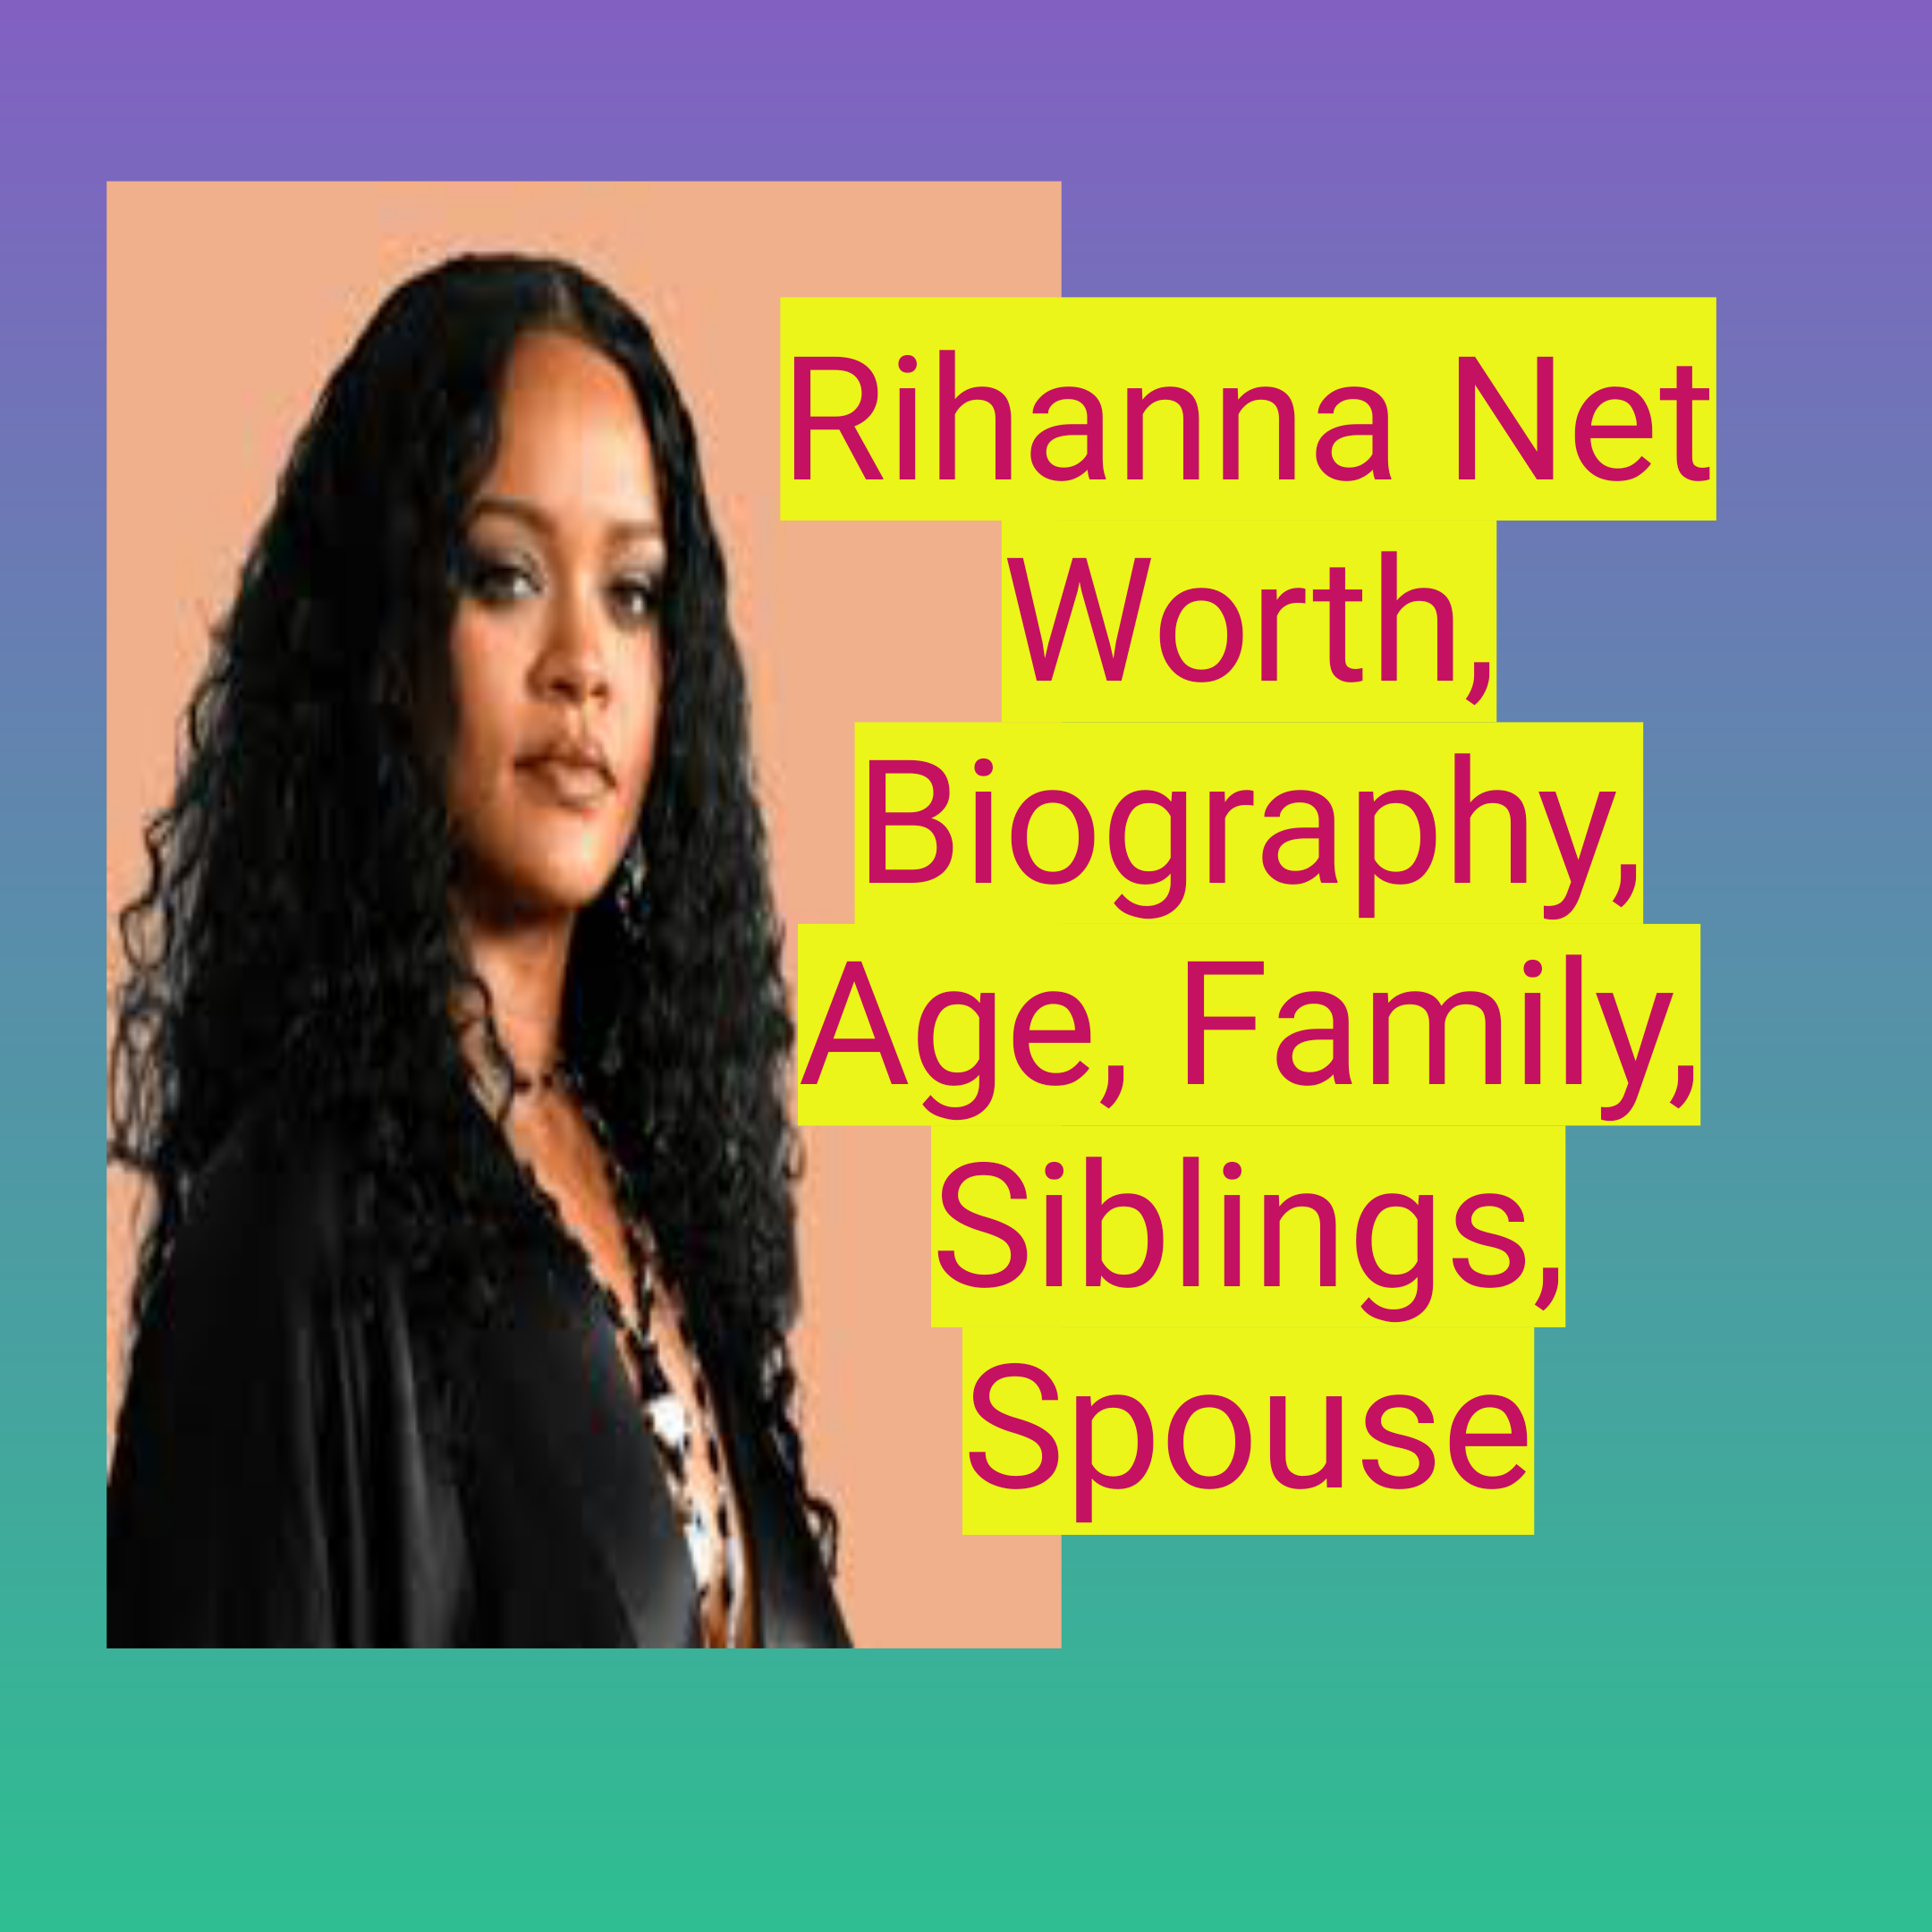 Rihanna Net Worth, Biography, Age, Family, Siblings, Spouse